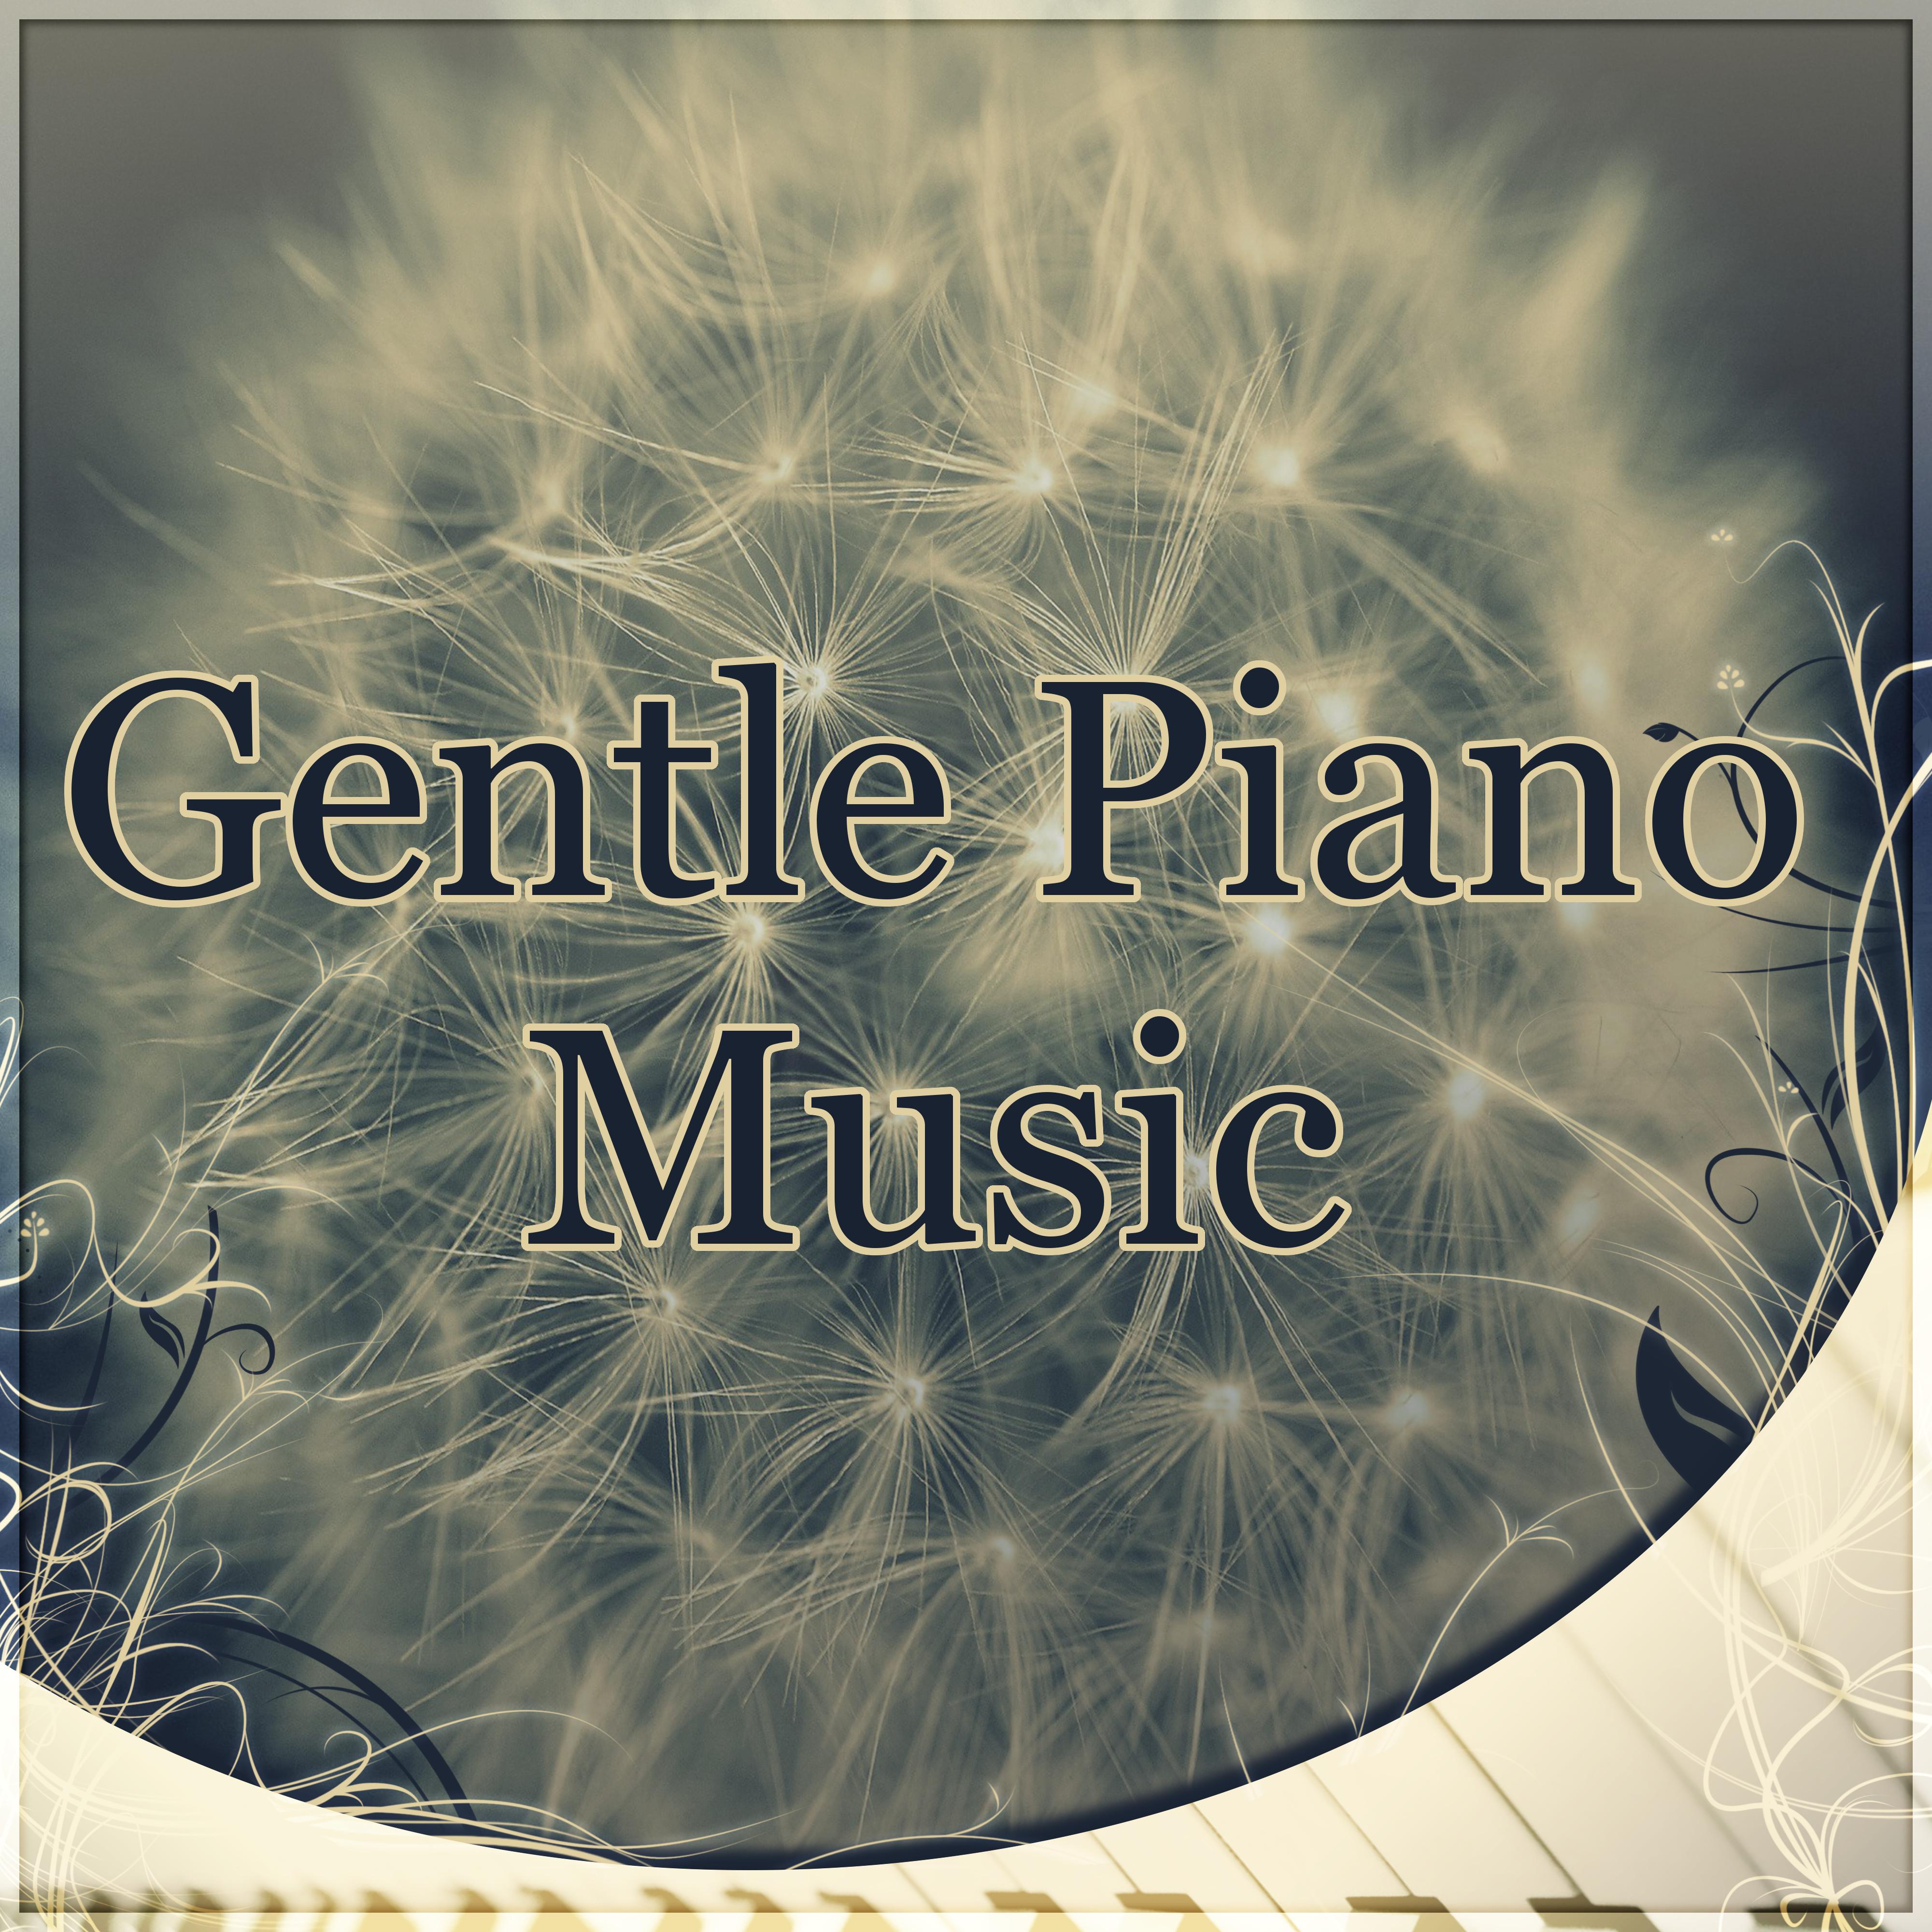 Gentle Piano Music  Natural Sleep Aid, White Noise for Deep Sleep, Lullabies with Relaxing Nature Sounds, Sleep Through the Night, Calm Music to Fall Asleep